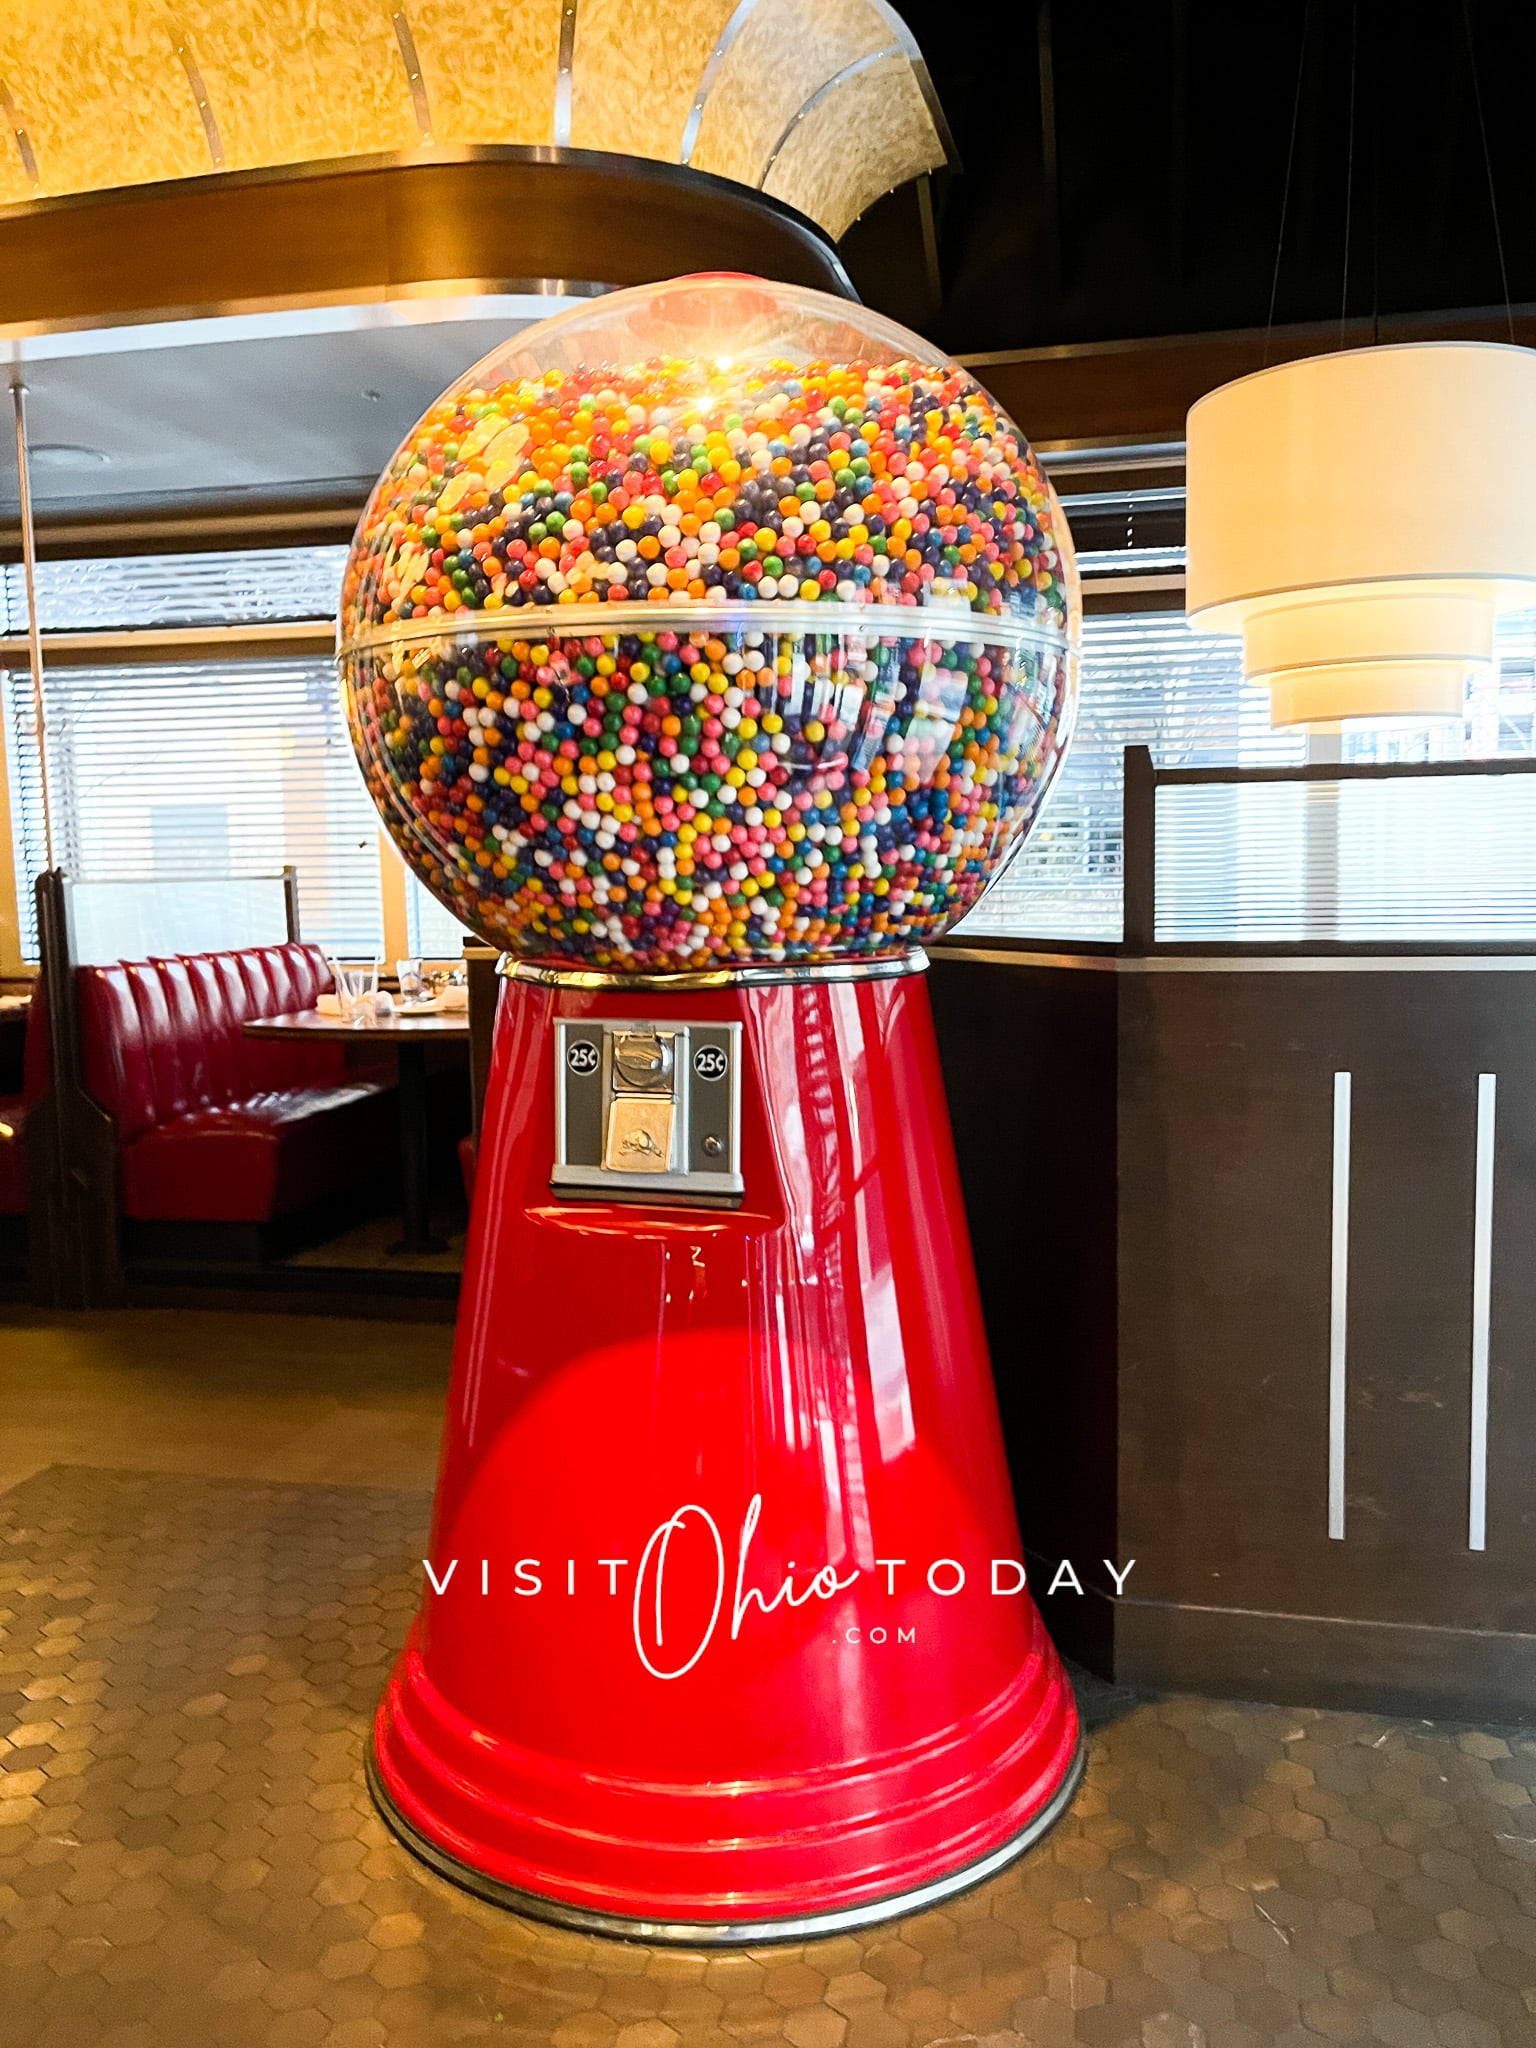 giant gumball machine with red on bottom and gumballs on top Photo credit: Cindy Gordon of VisitOhioToday.com